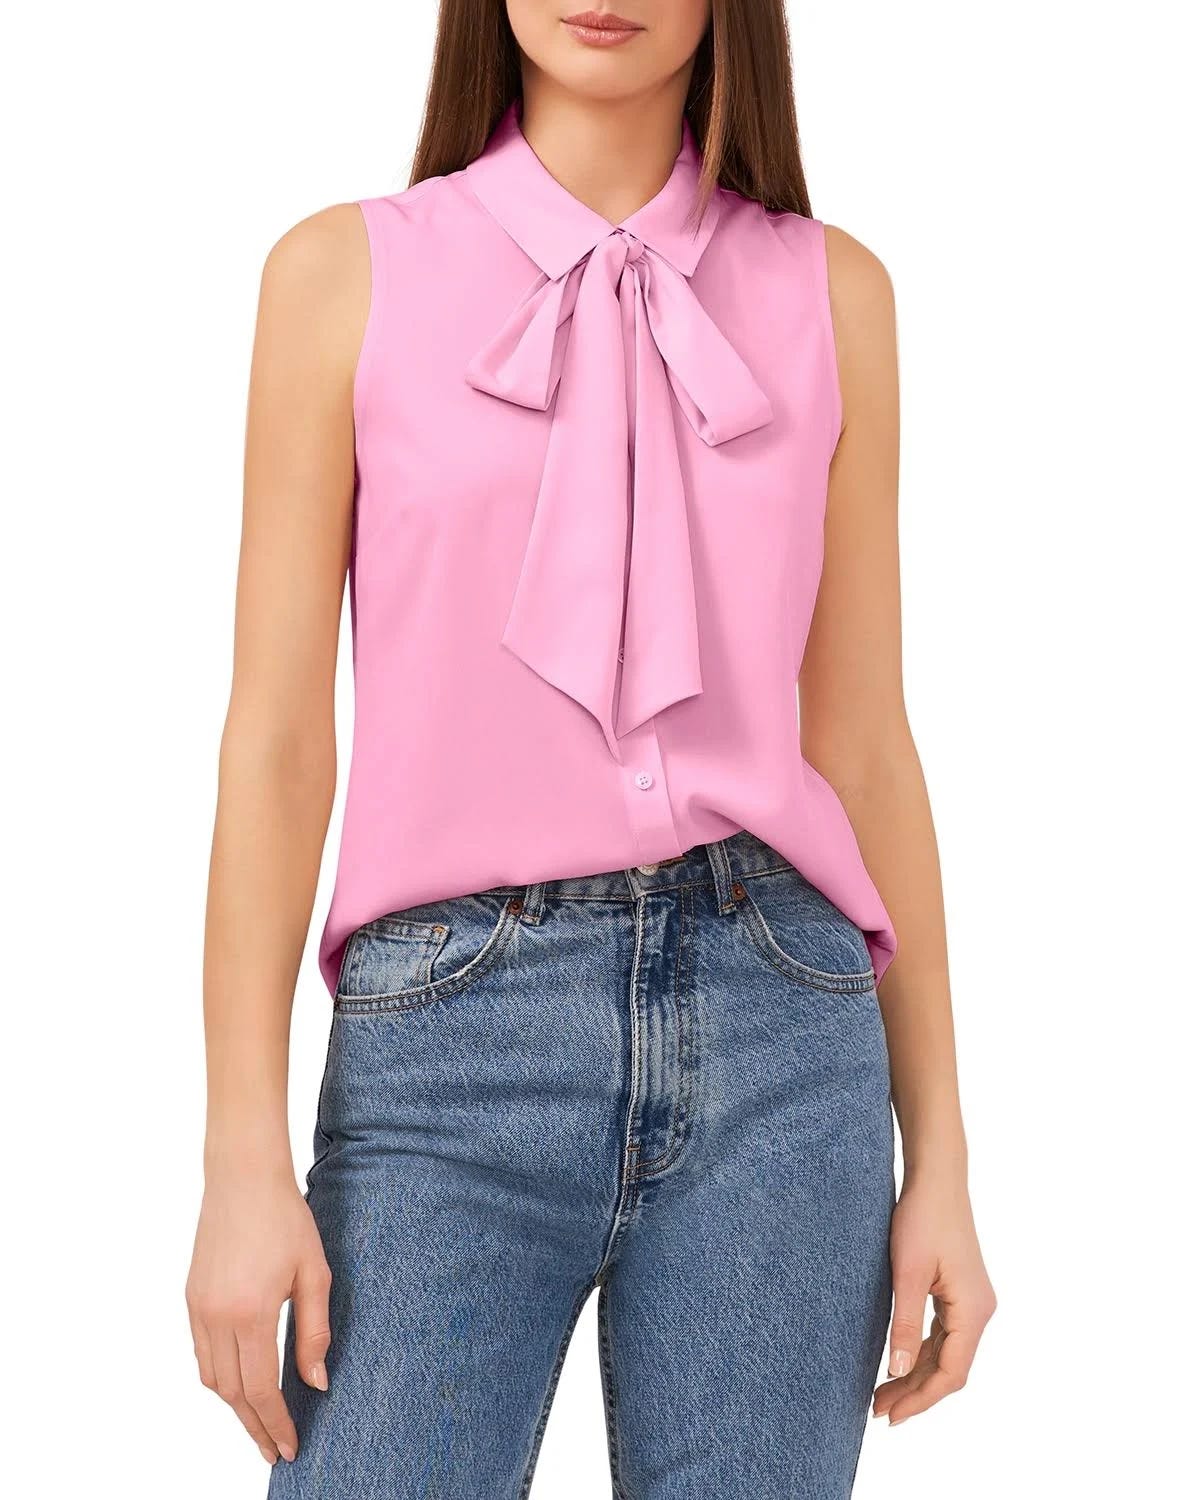 Pink Sleeveless Bow-Tie Blouse by CeCe | Image